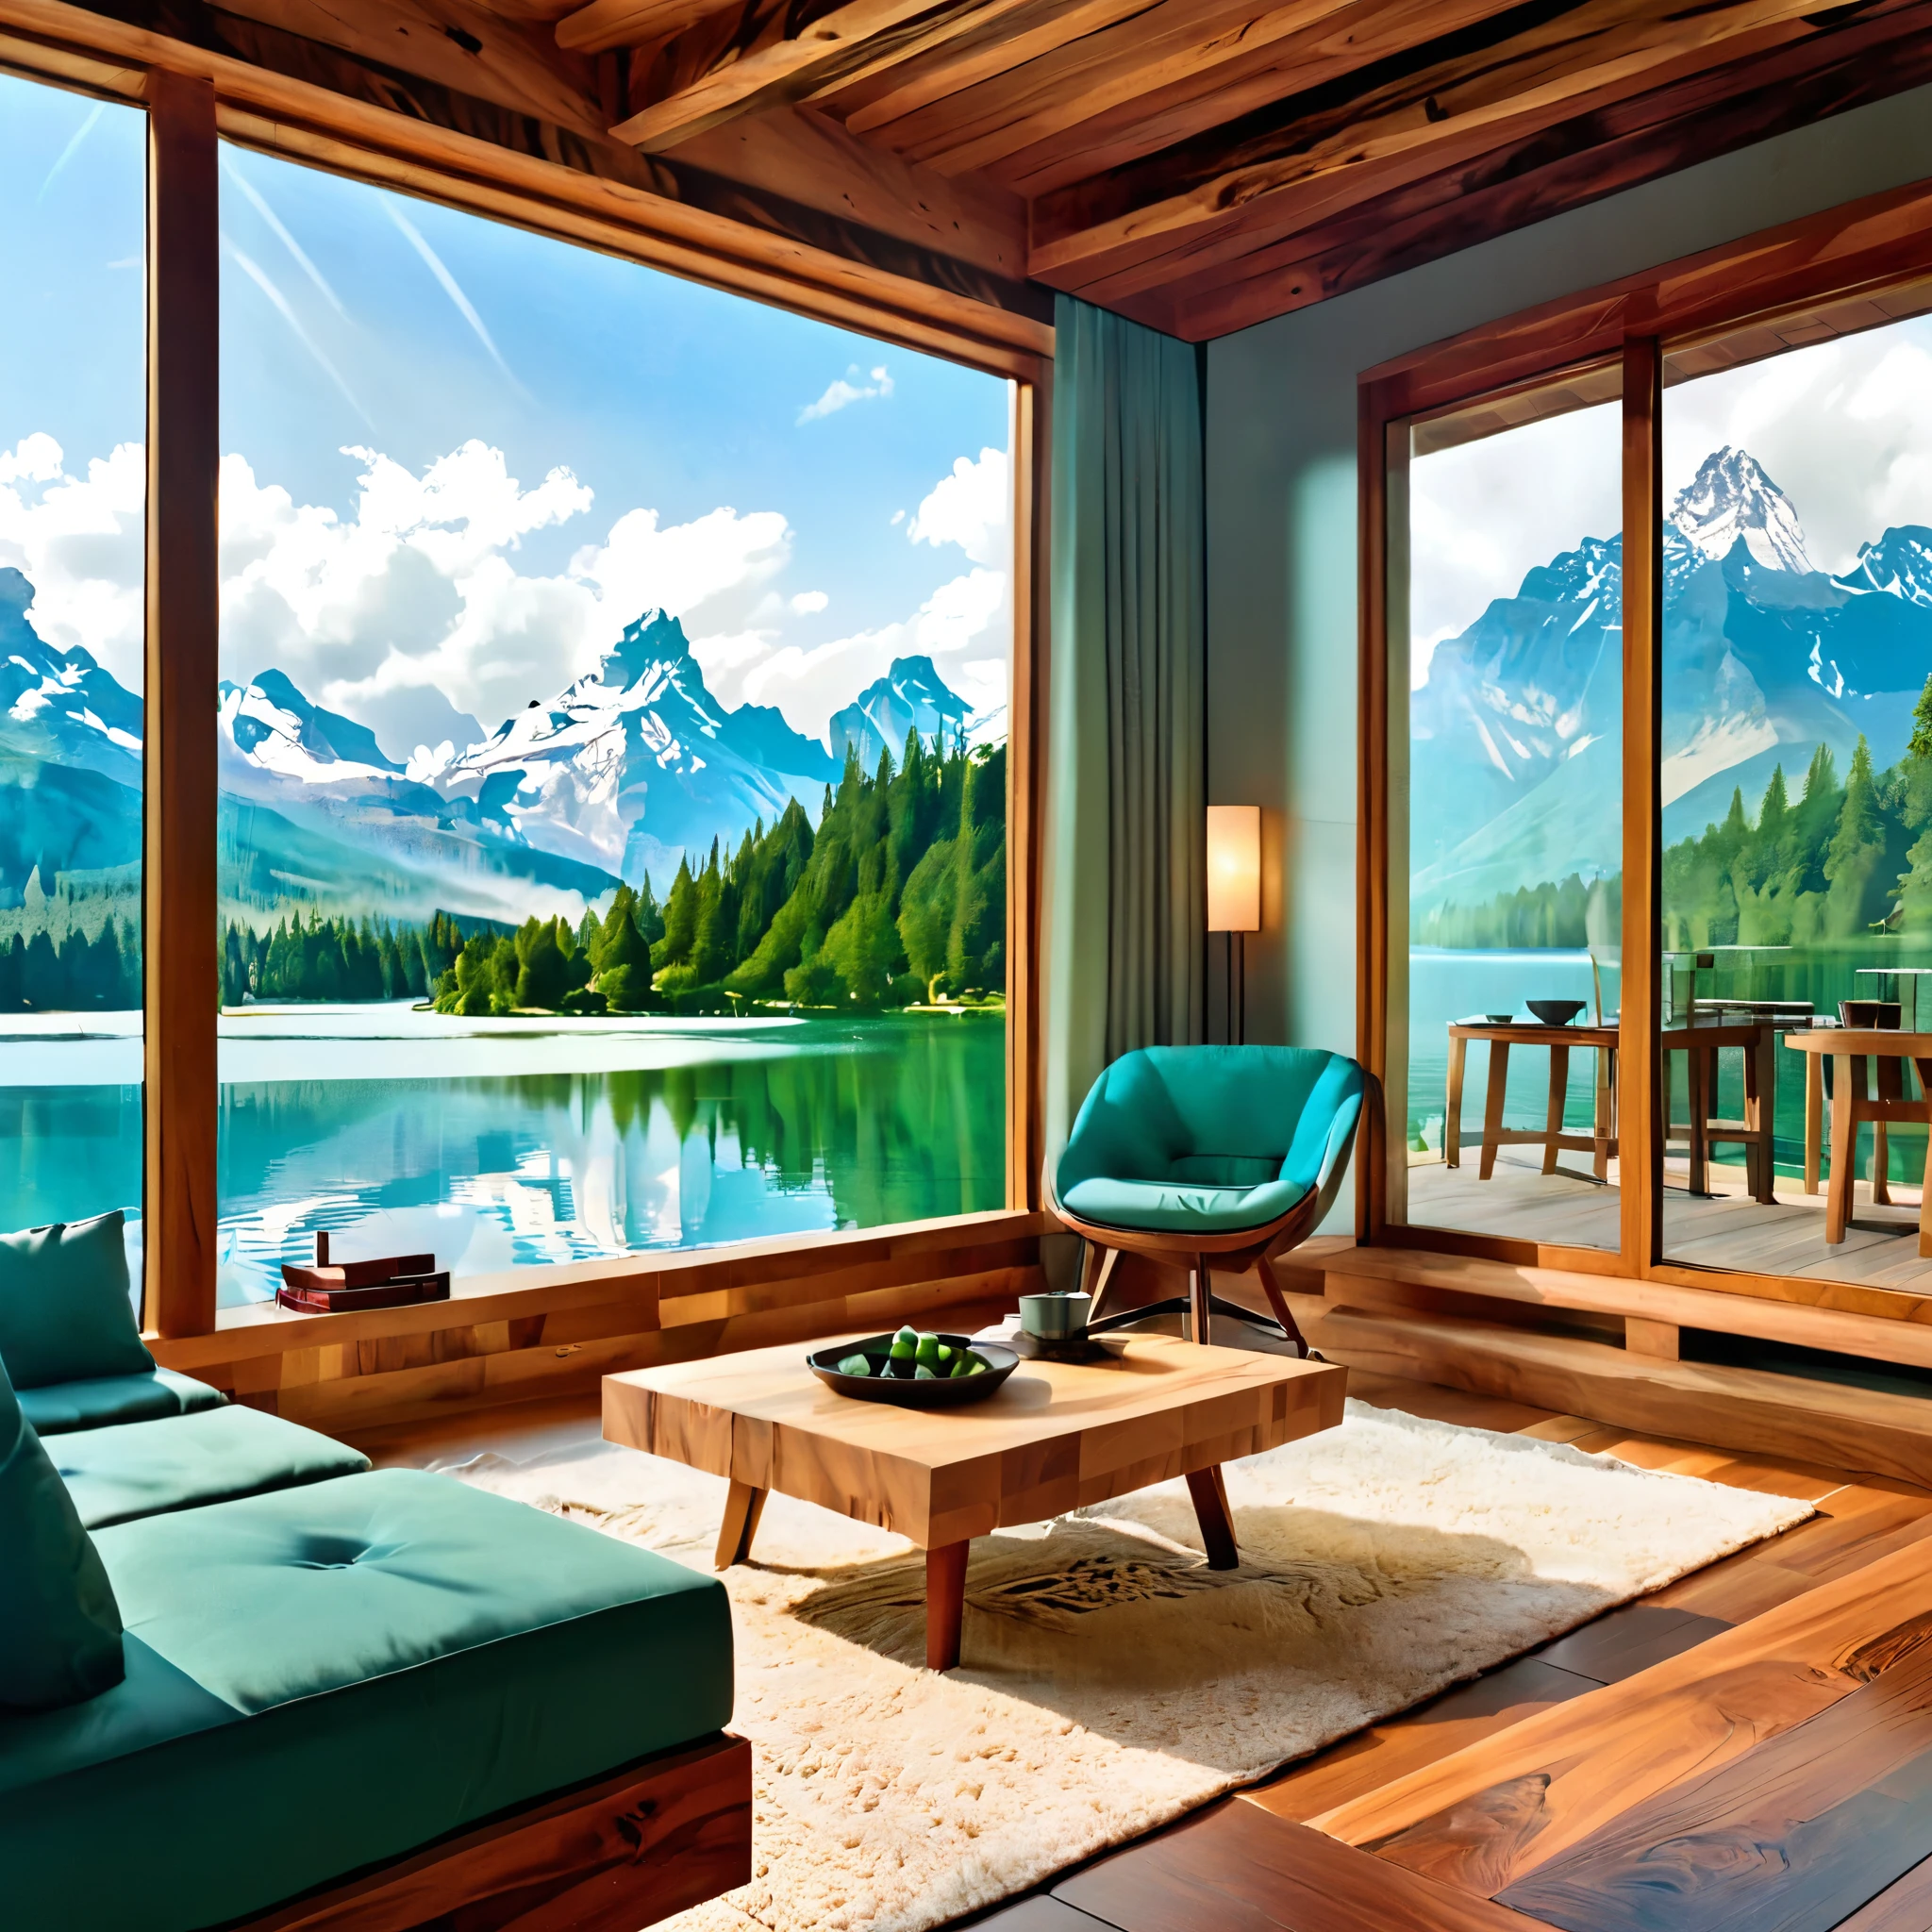 A luxurious and modern living room with a large open view of a serene mountain lake. The space features sleek wooden furniture, minimalist decor, and large glass windows that enhance the natural beauty outside. The color palette includes cool tones of blue and green, complemented by warm wooden accents and contemporary lighting fixtures